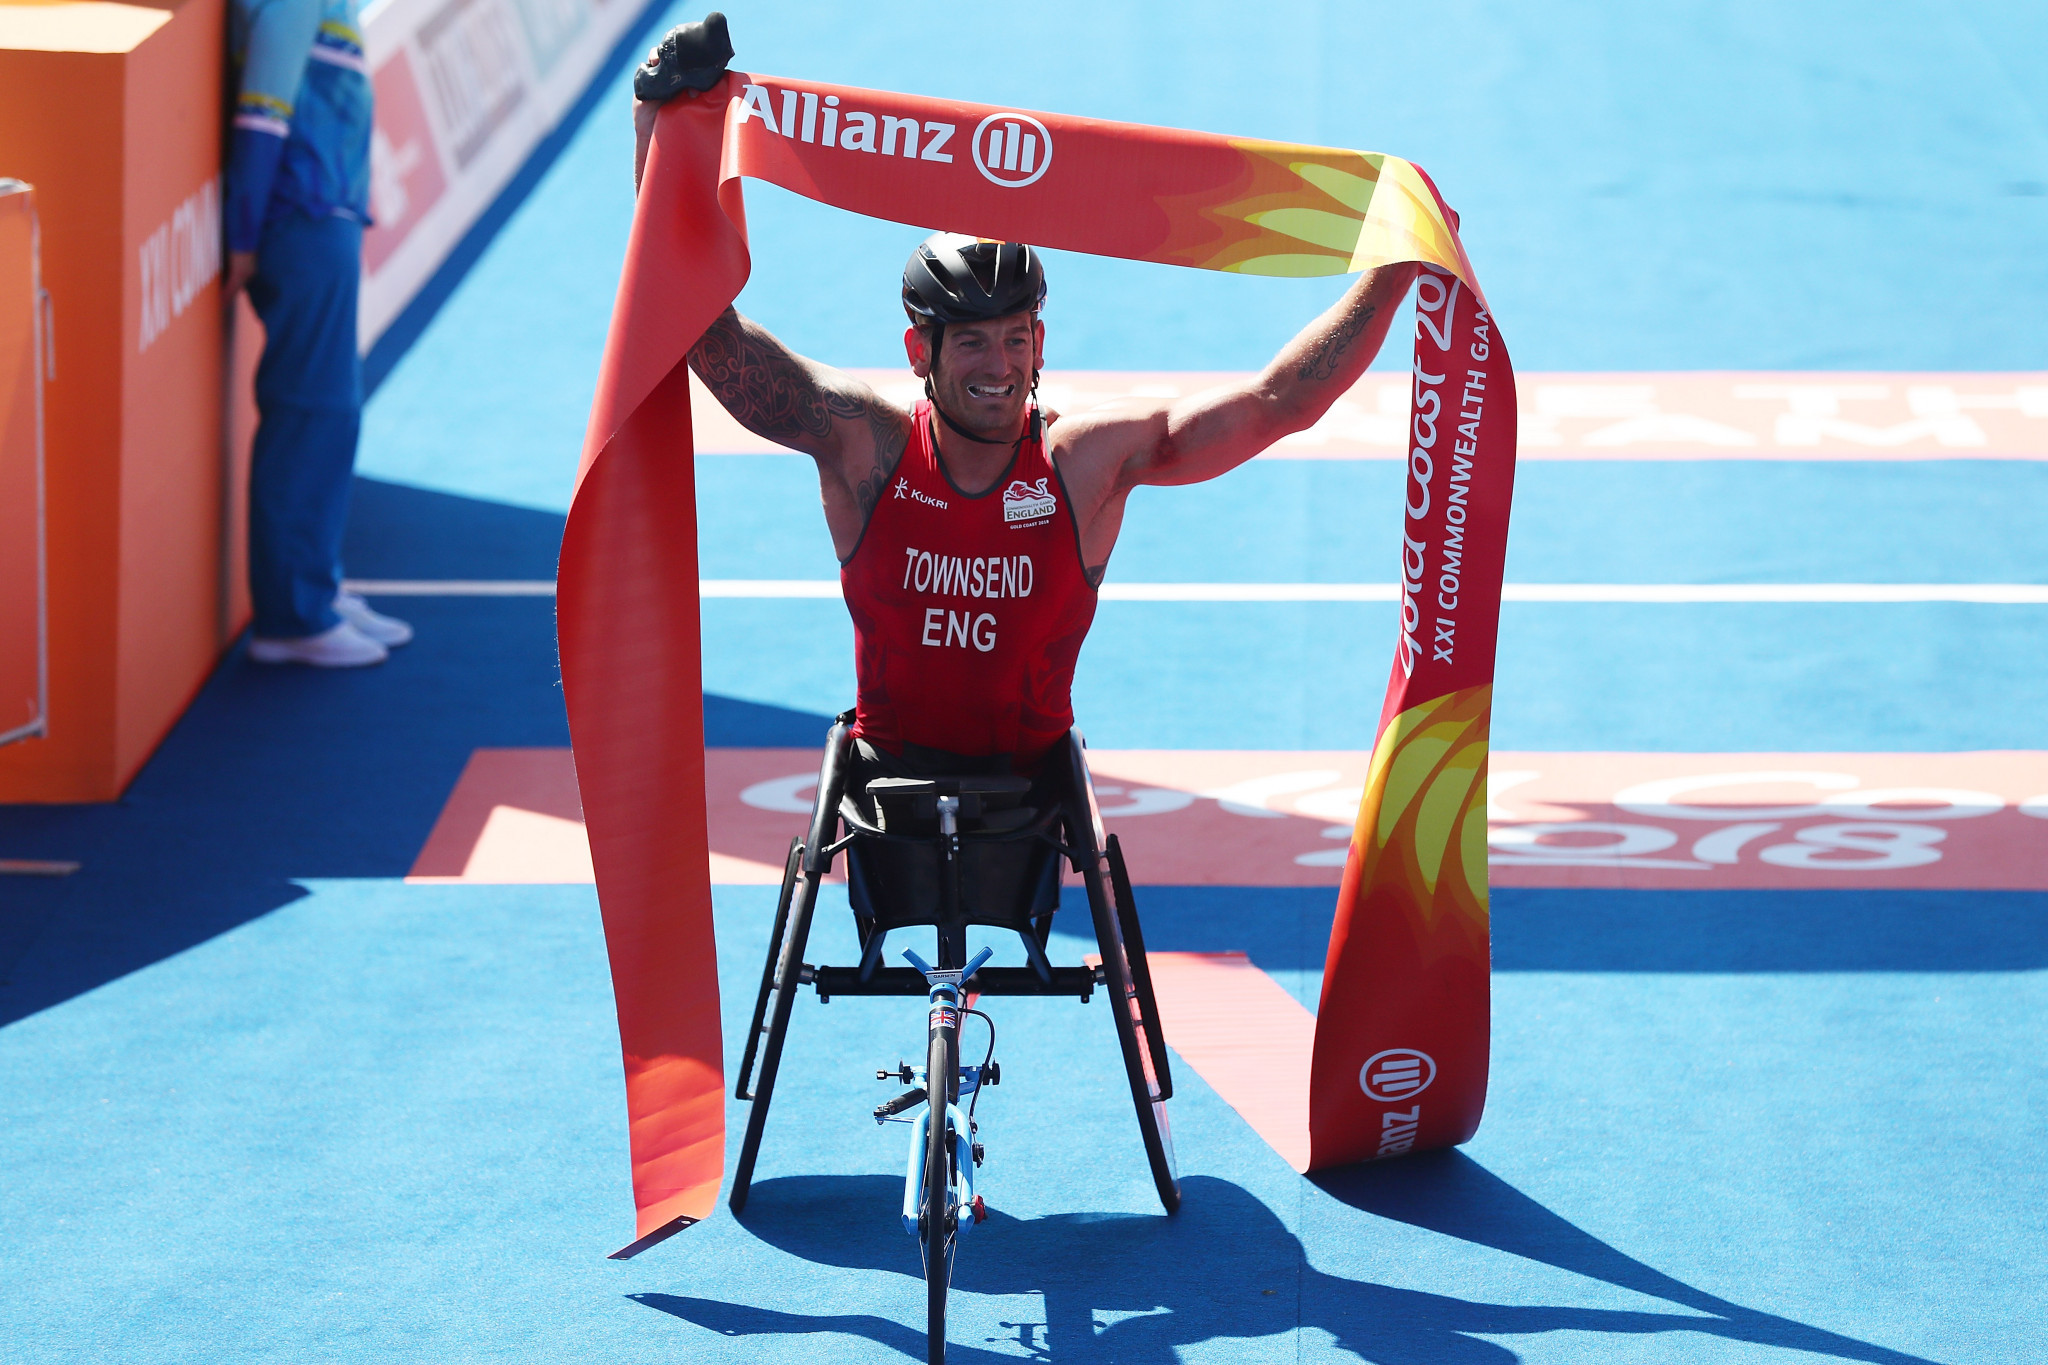 Townsend and Jones avoid crashes to claim English Paratriathlon double at Gold Coast 2018